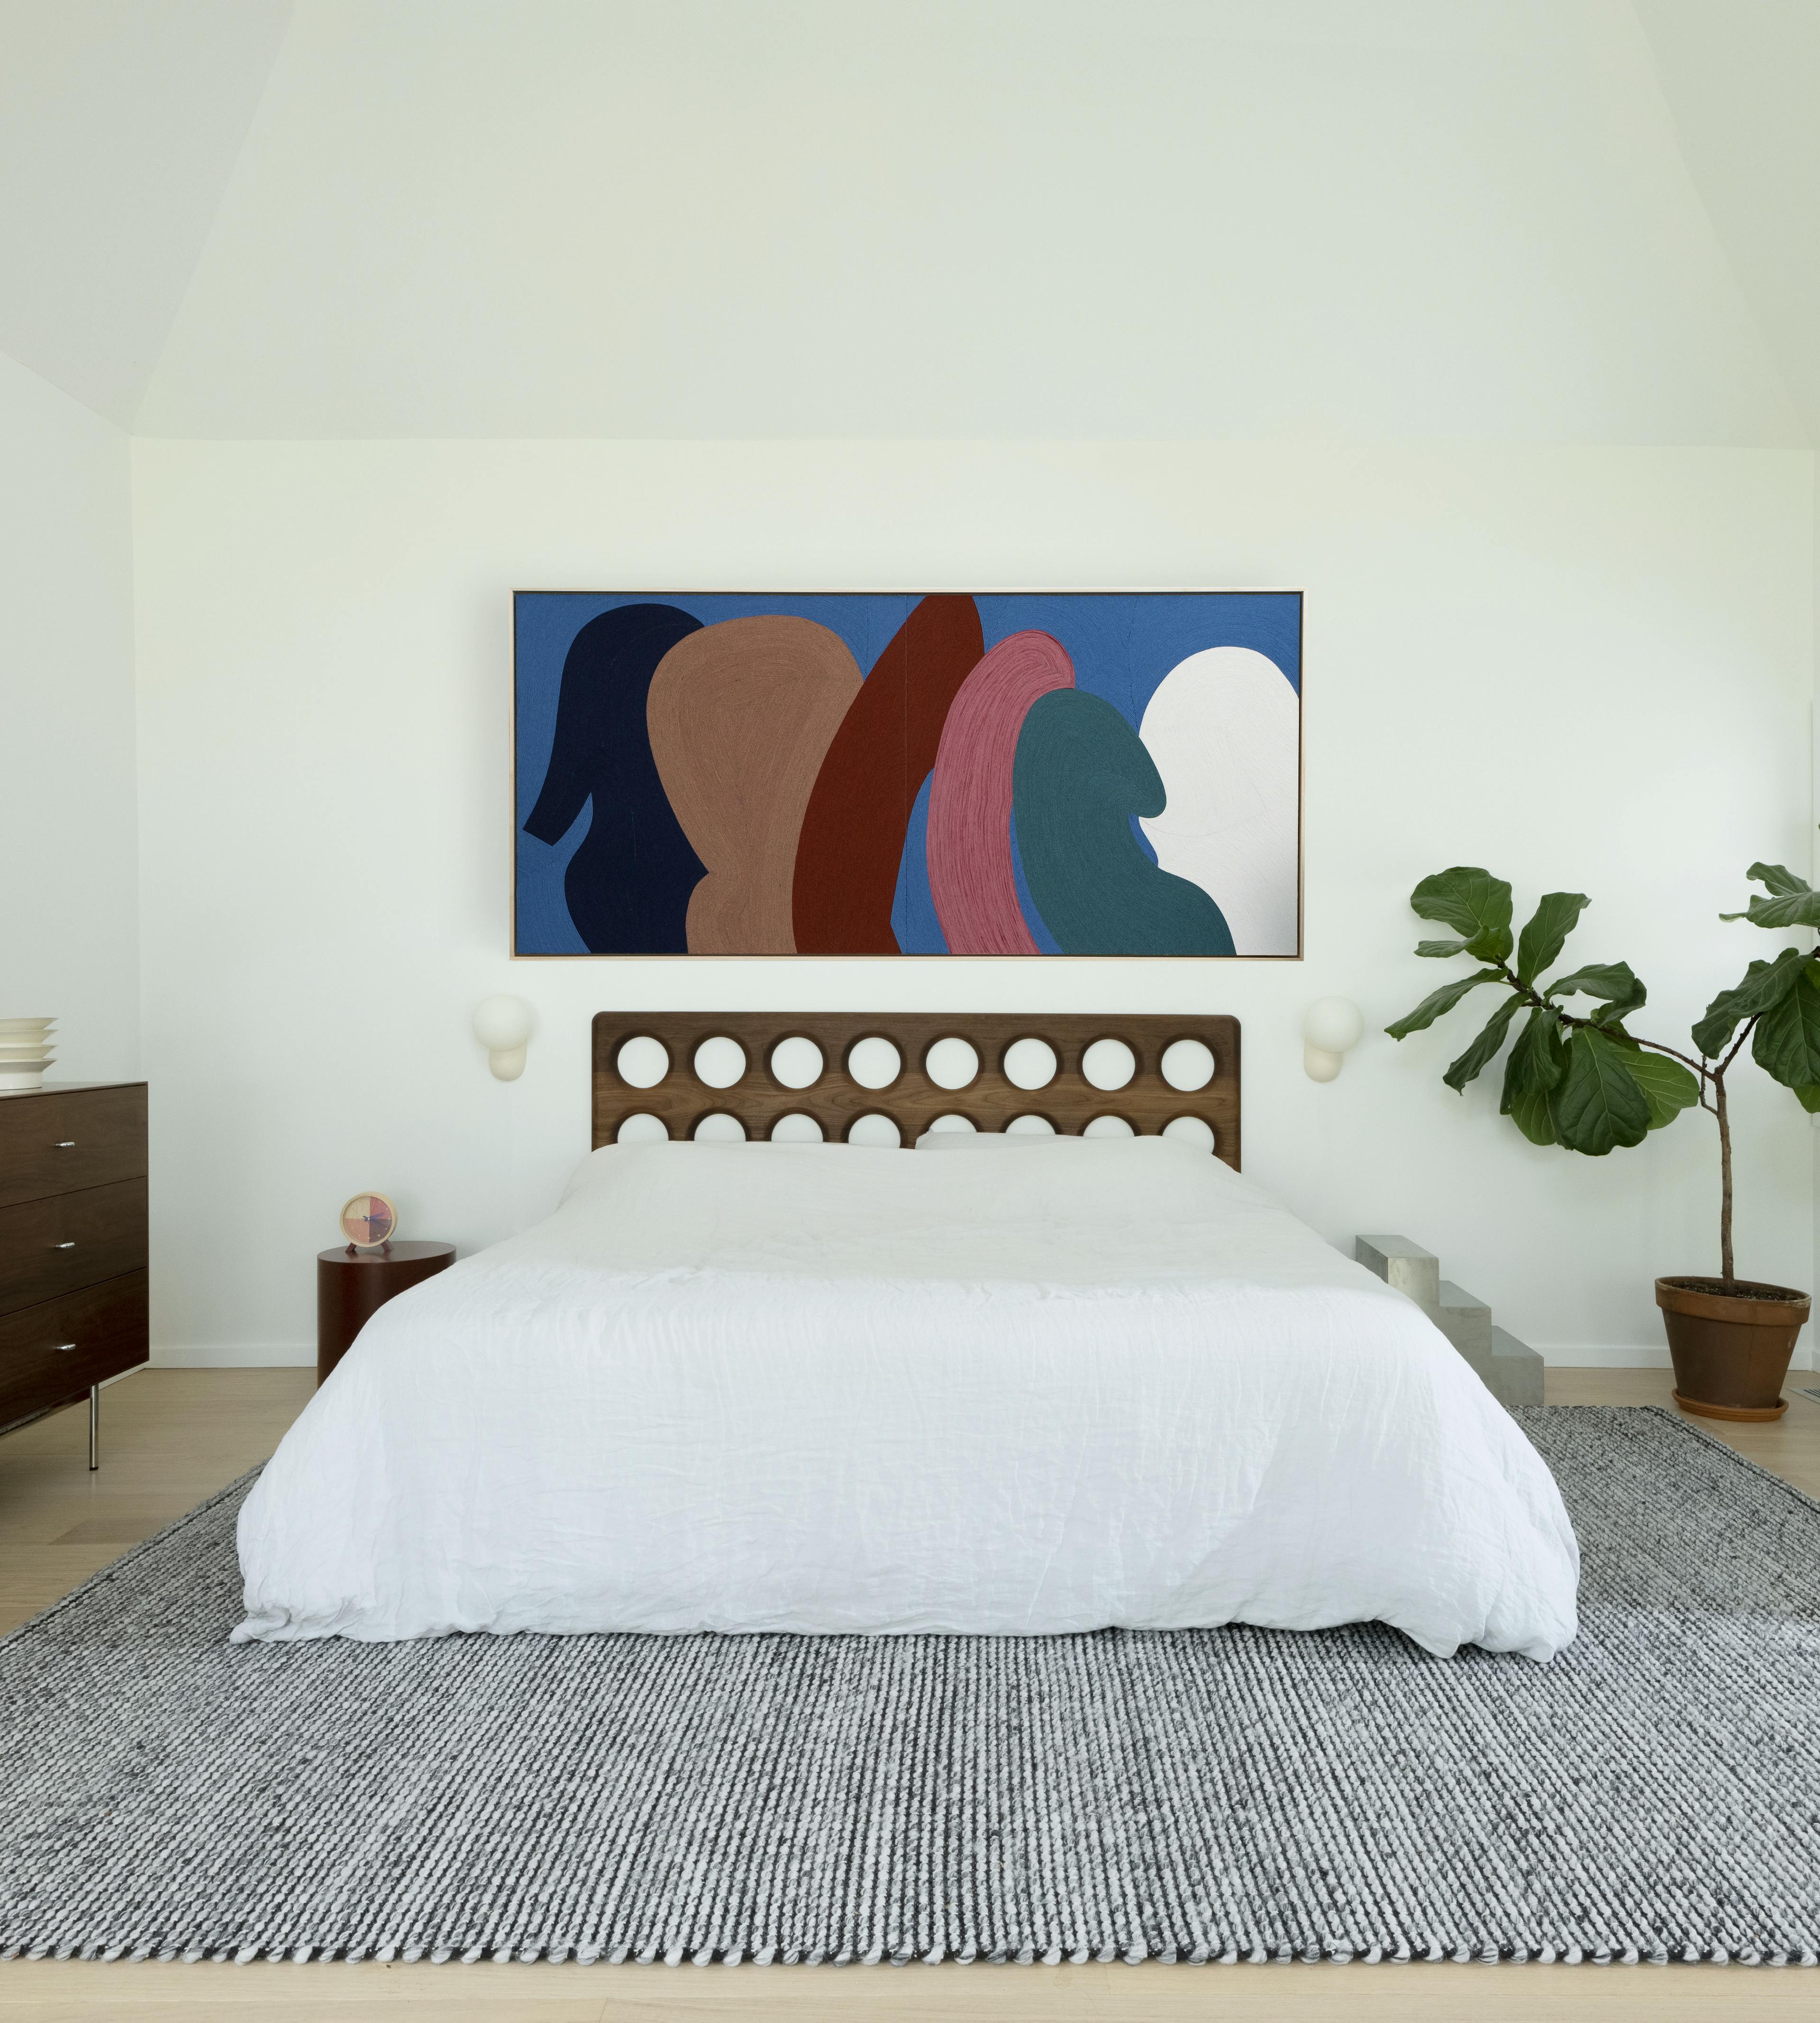 Large, abstract textile work made from yarn by artist Paola Rodriguez installed above a bed with white sheets and headboard with carved out circles.